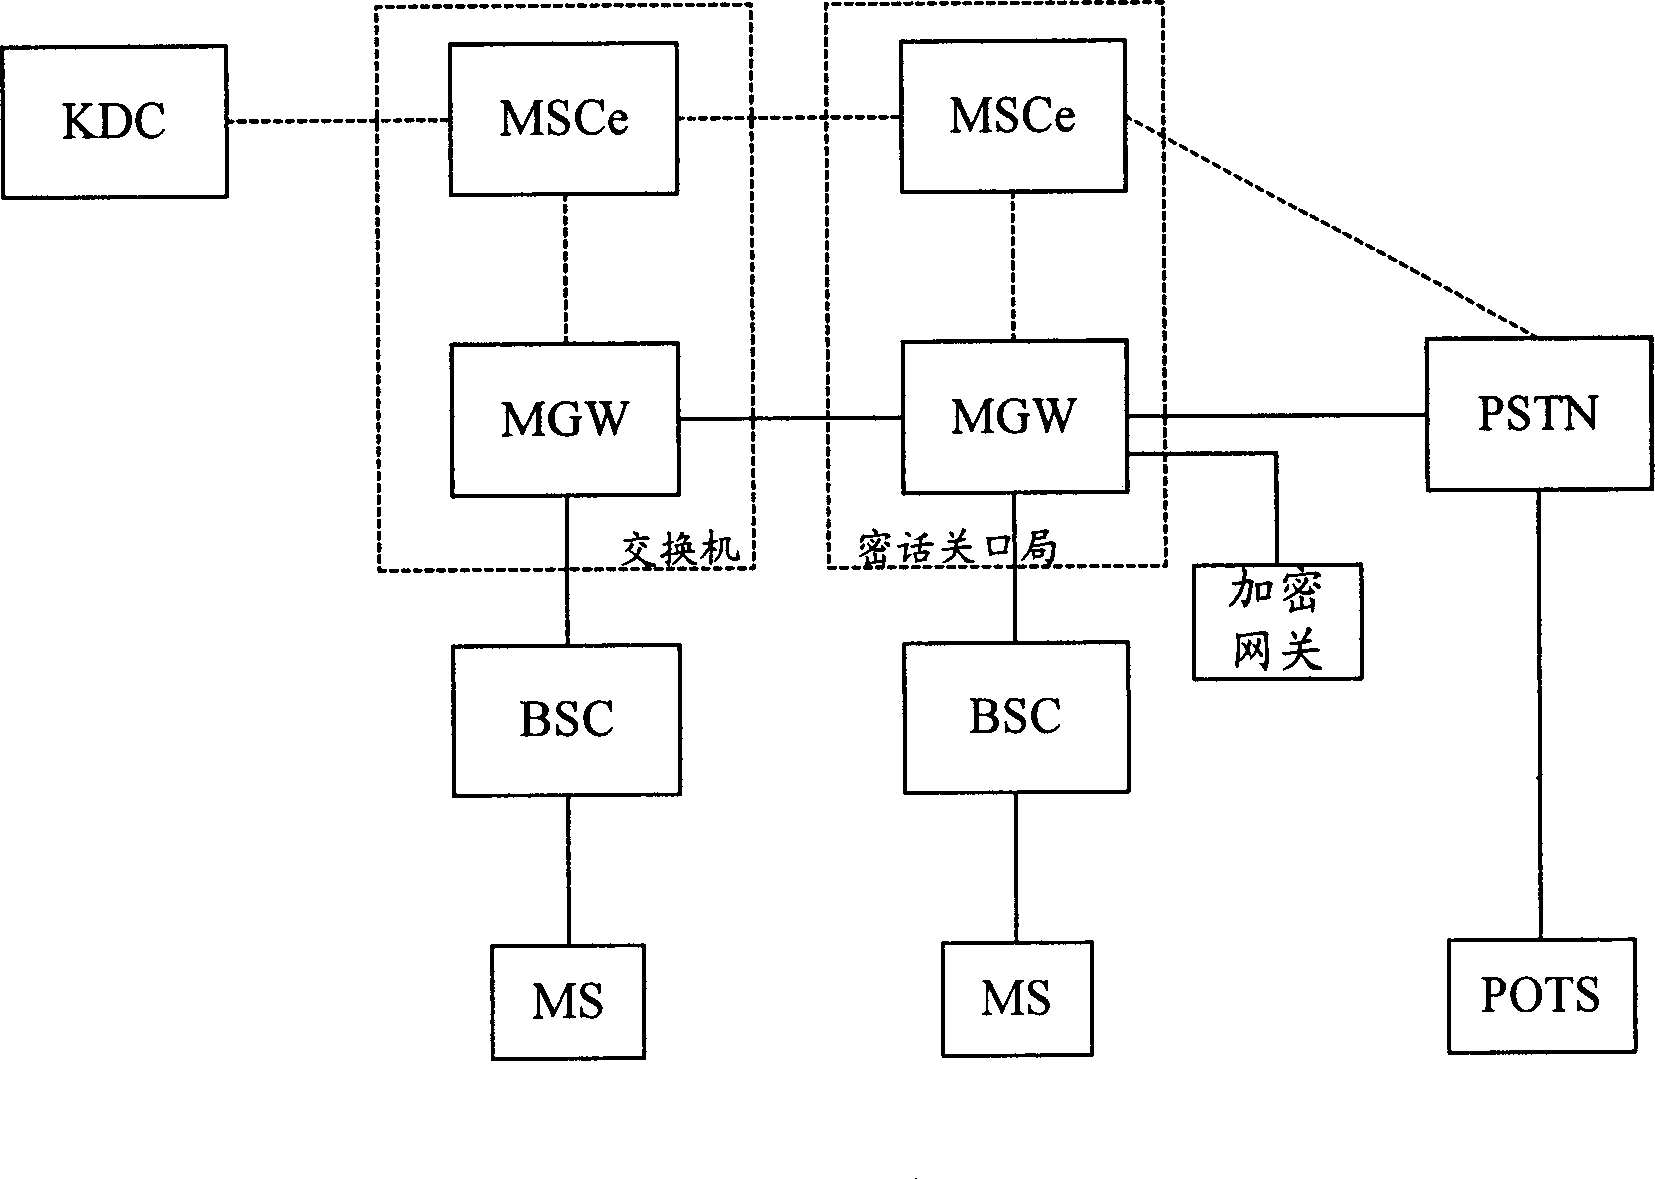 Method for realizing switch-over between open call/secrete call in end-to-end voice telecommunication